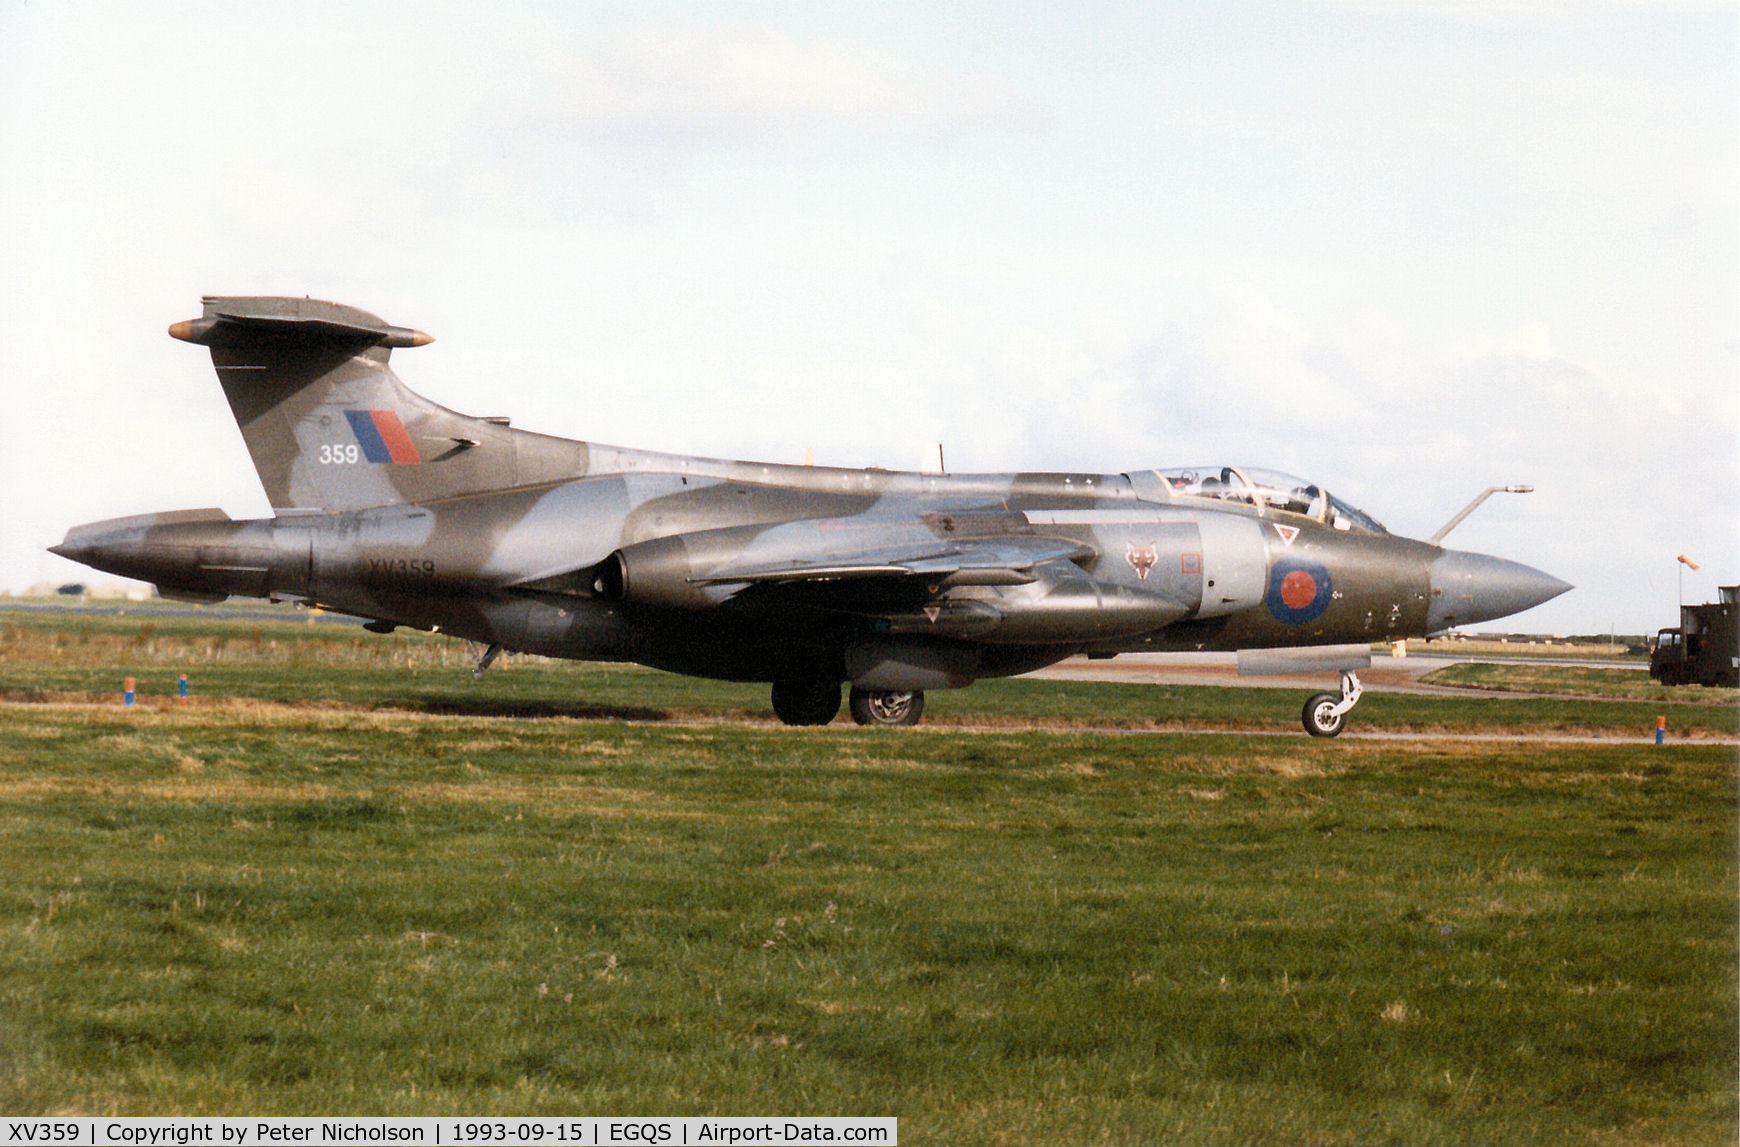 XV359, 1968 Hawker Siddeley Buccaneer S.2B C/N B3-09-67, Buccaneer S.2B of 12 Squadron taxying to Runway 05 at RAF Lossiemouth in September 1993.